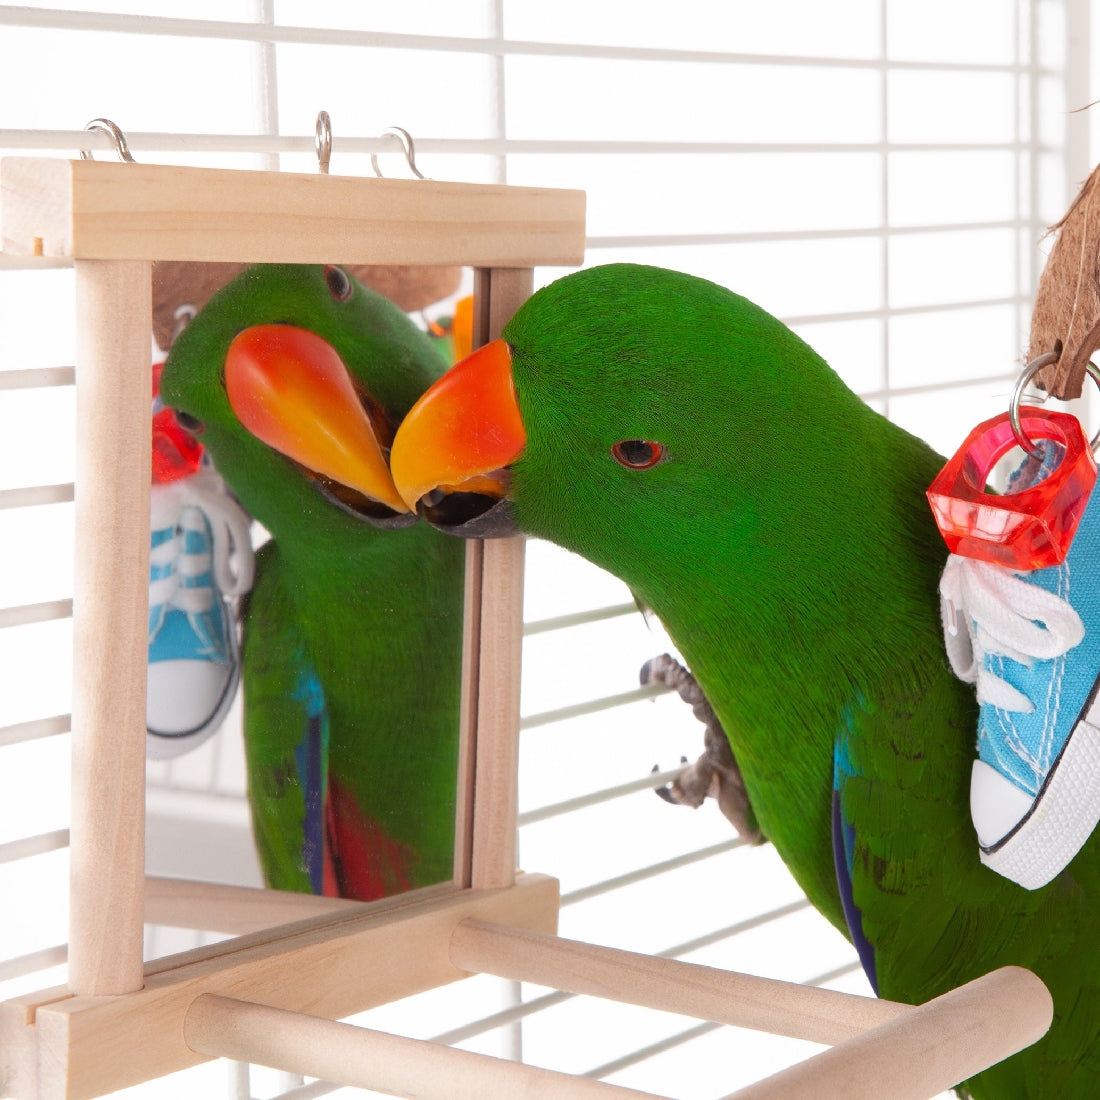 Green parrot toy looking at reflection in mirror, in cage.